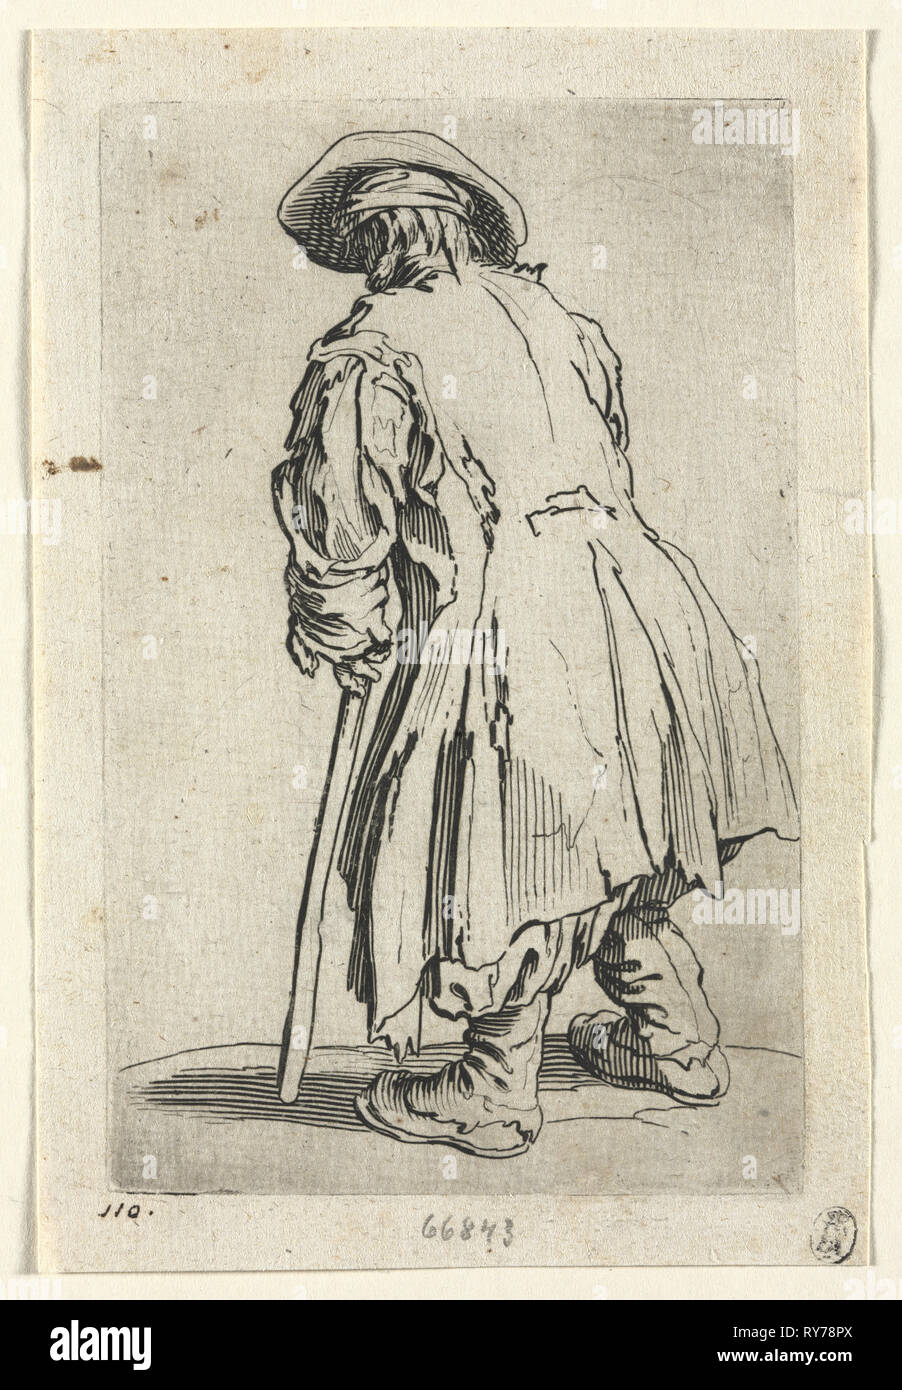 The Beggars: Old Beggar on One Single Crutch, c. 1623. Jacques Callot (French, 1592-1635). Etching; paper: 15.7 x 10.5 cm (6 3/16 x 4 1/8 in.); plate: 13.8 x 8.8 cm (5 7/16 x 3 7/16 in Stock Photo